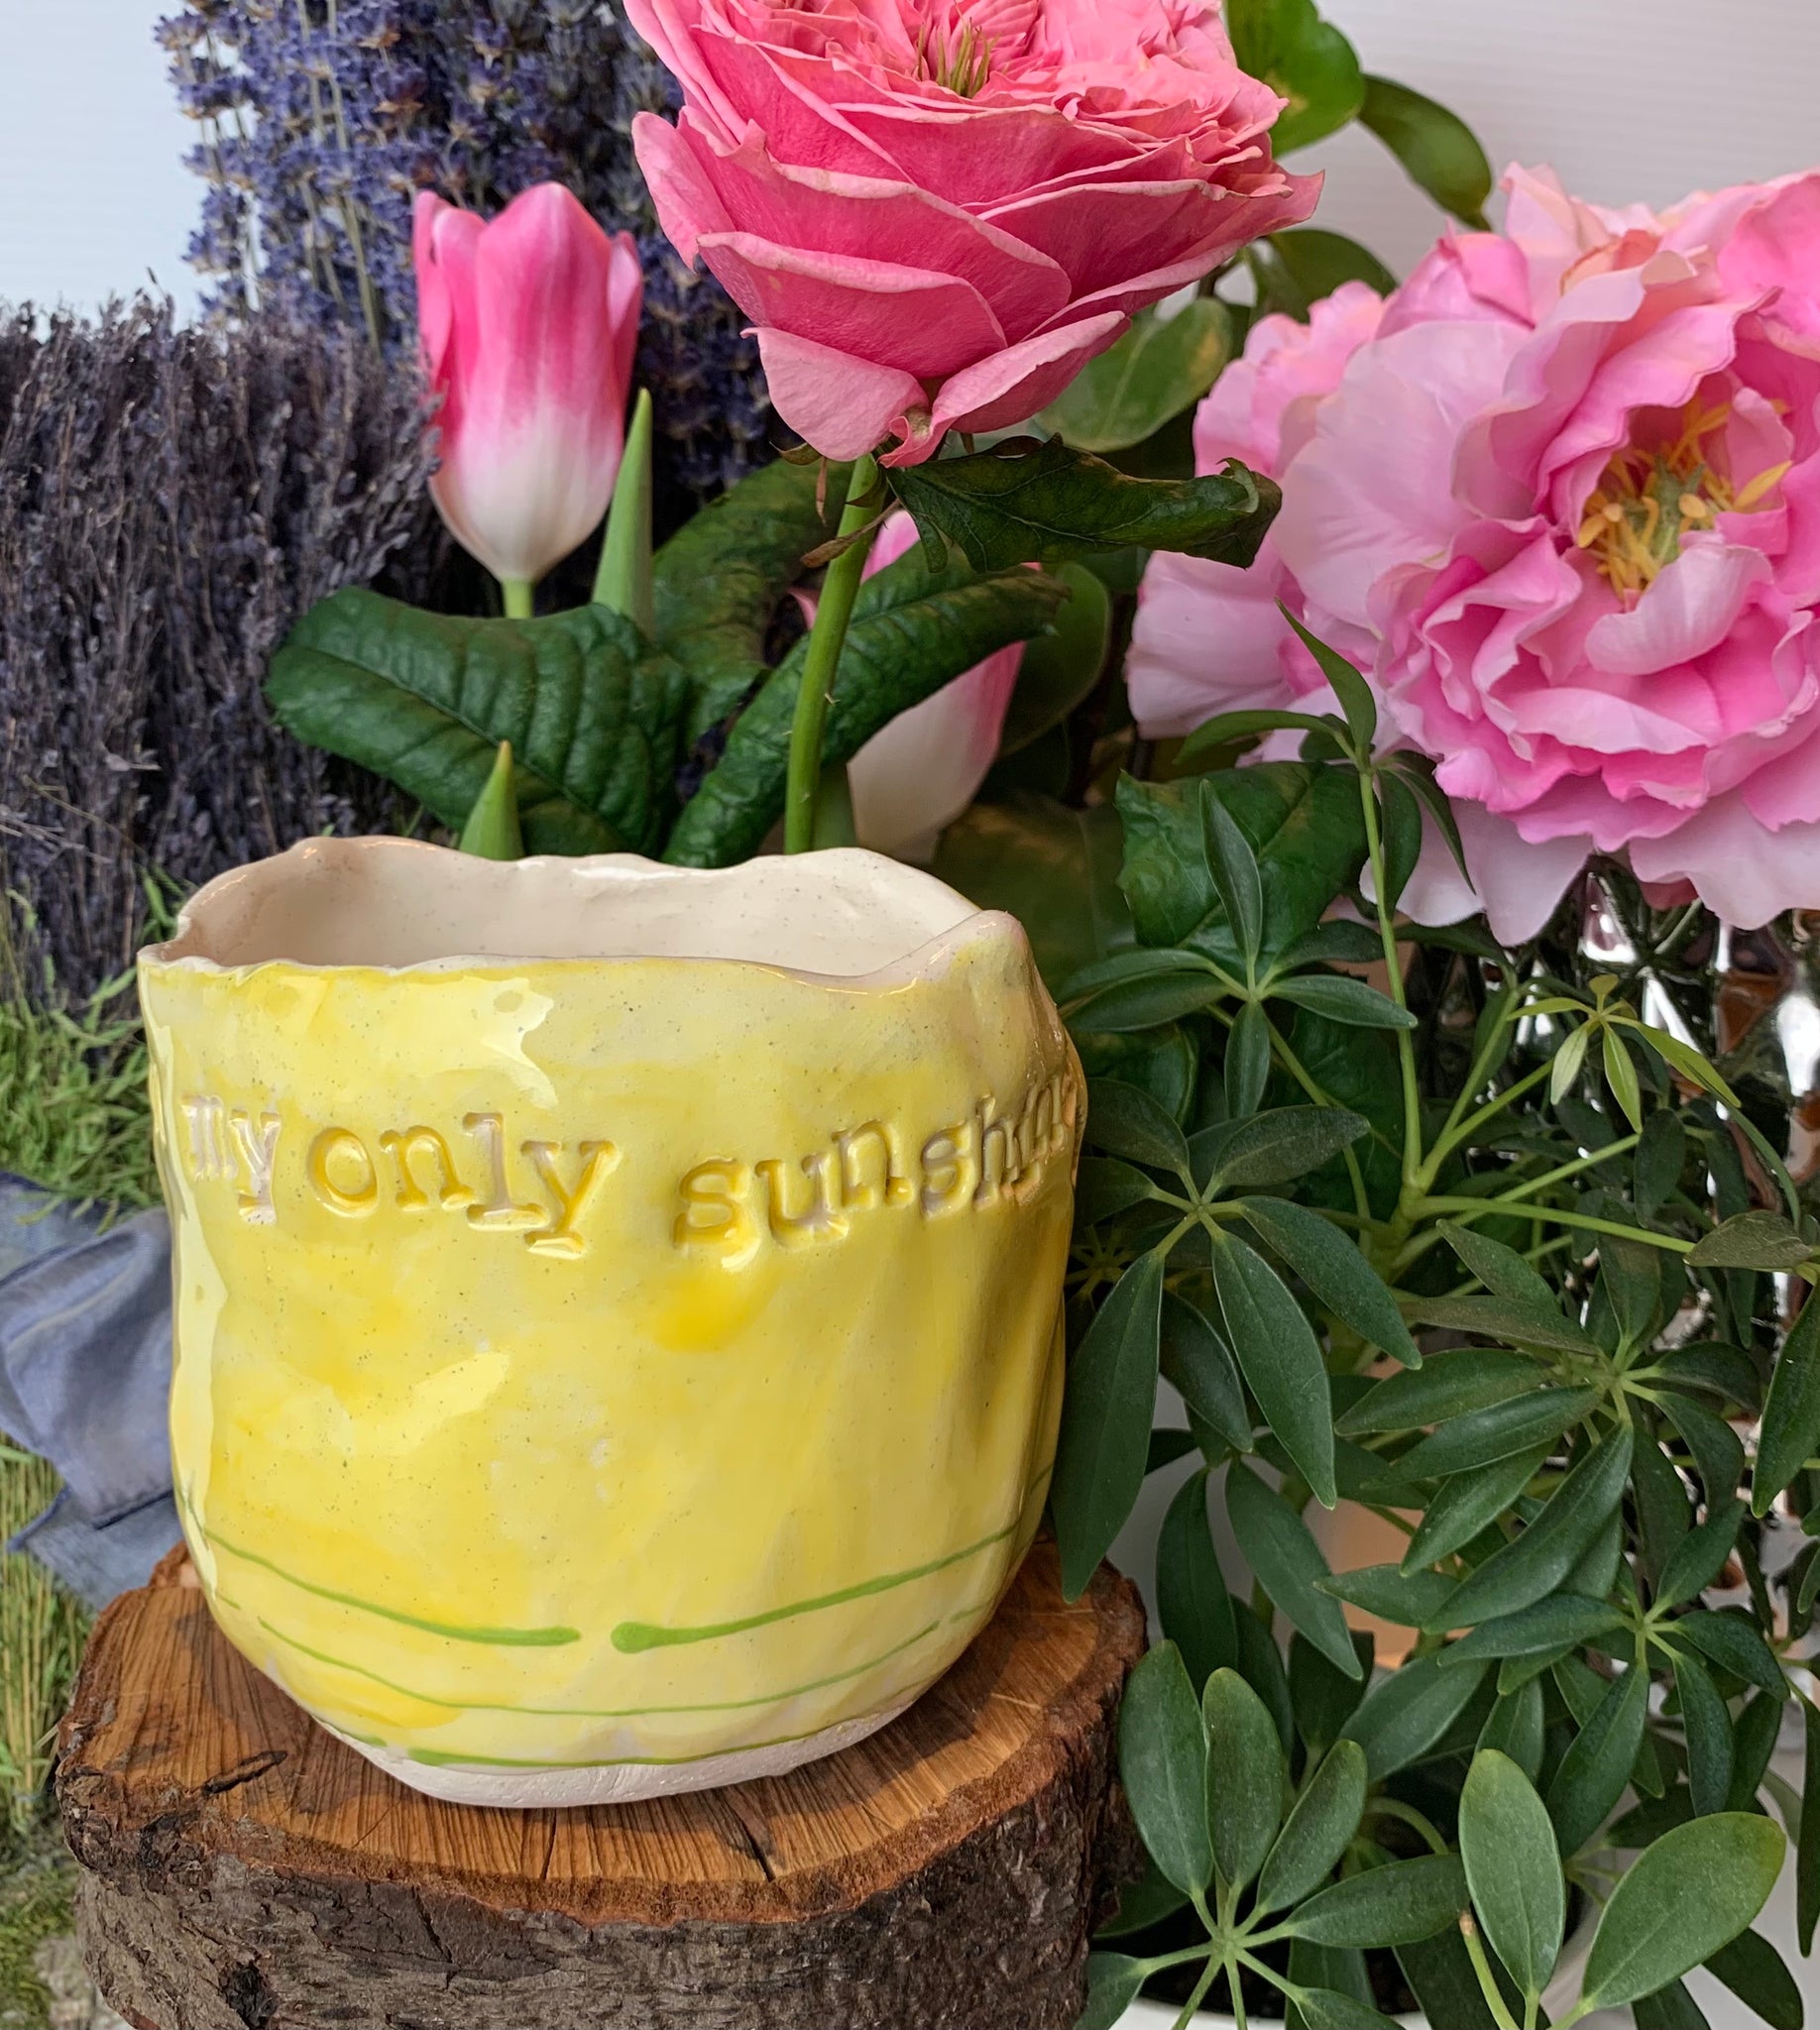 You are my sunshine 4" planter